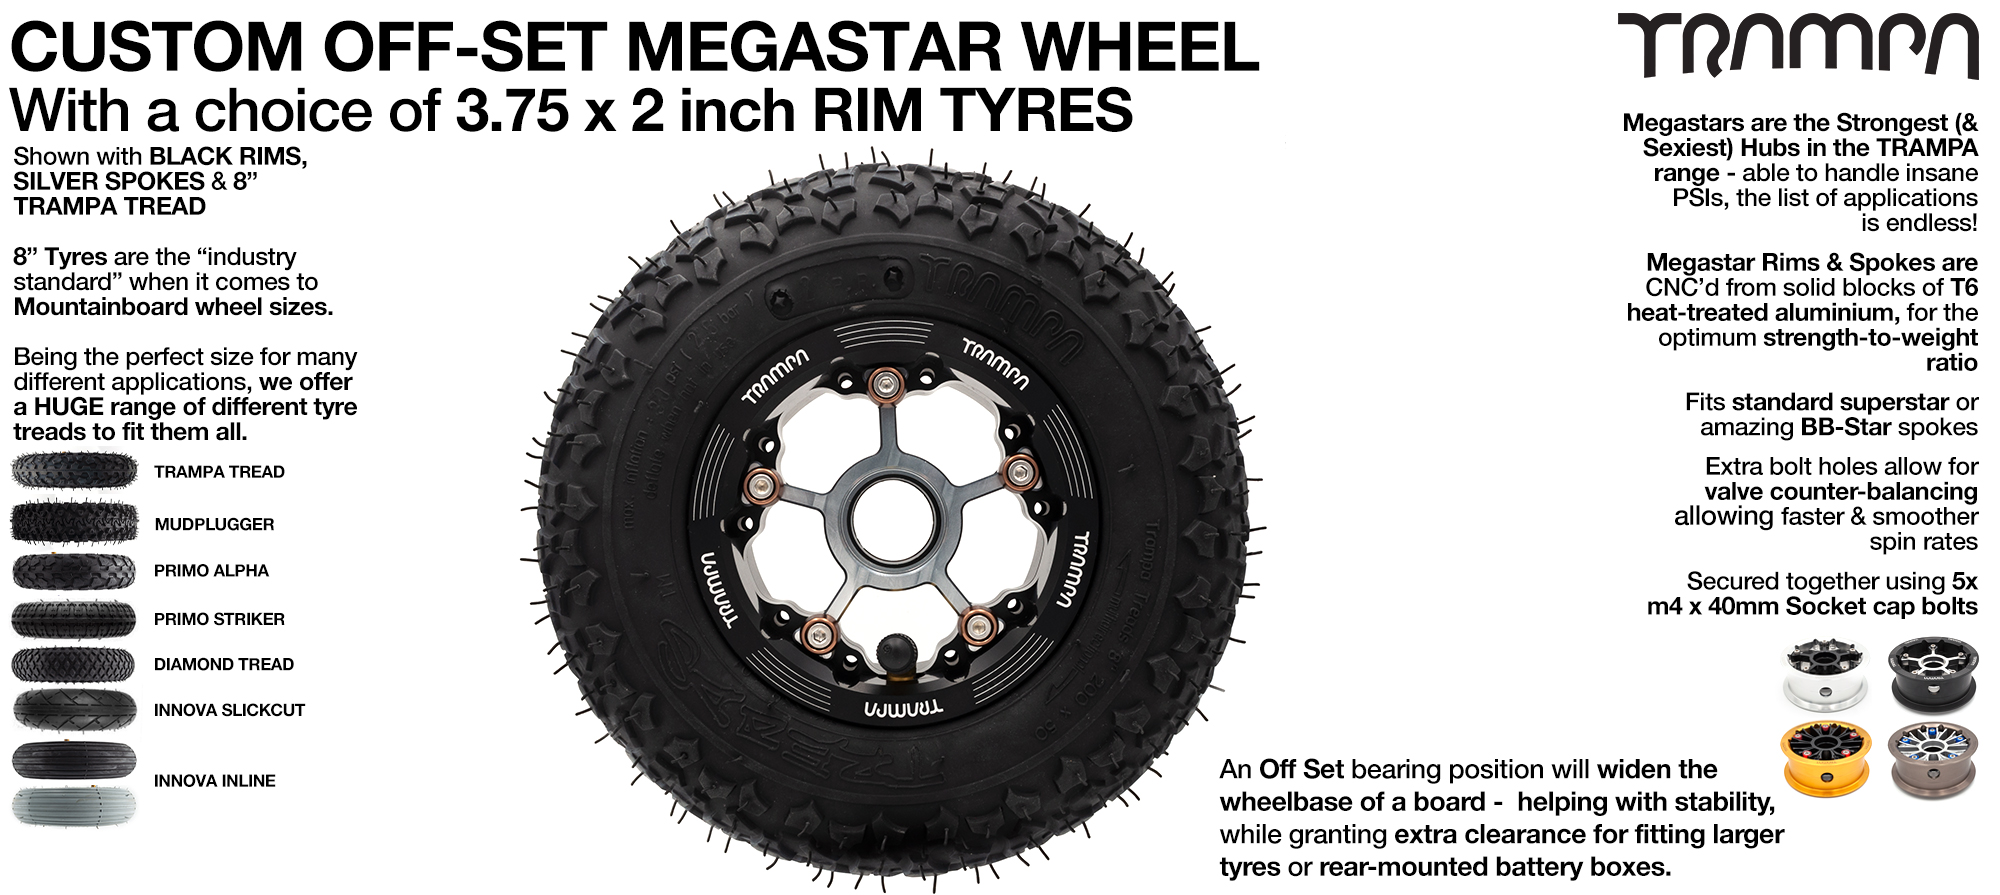 TRAMPA's OFF-SET MEGASTAR 8 hubs fit with any of the 3.75 inch rimmed Tyres making them the widest 8 Inch wheel on the planet!!